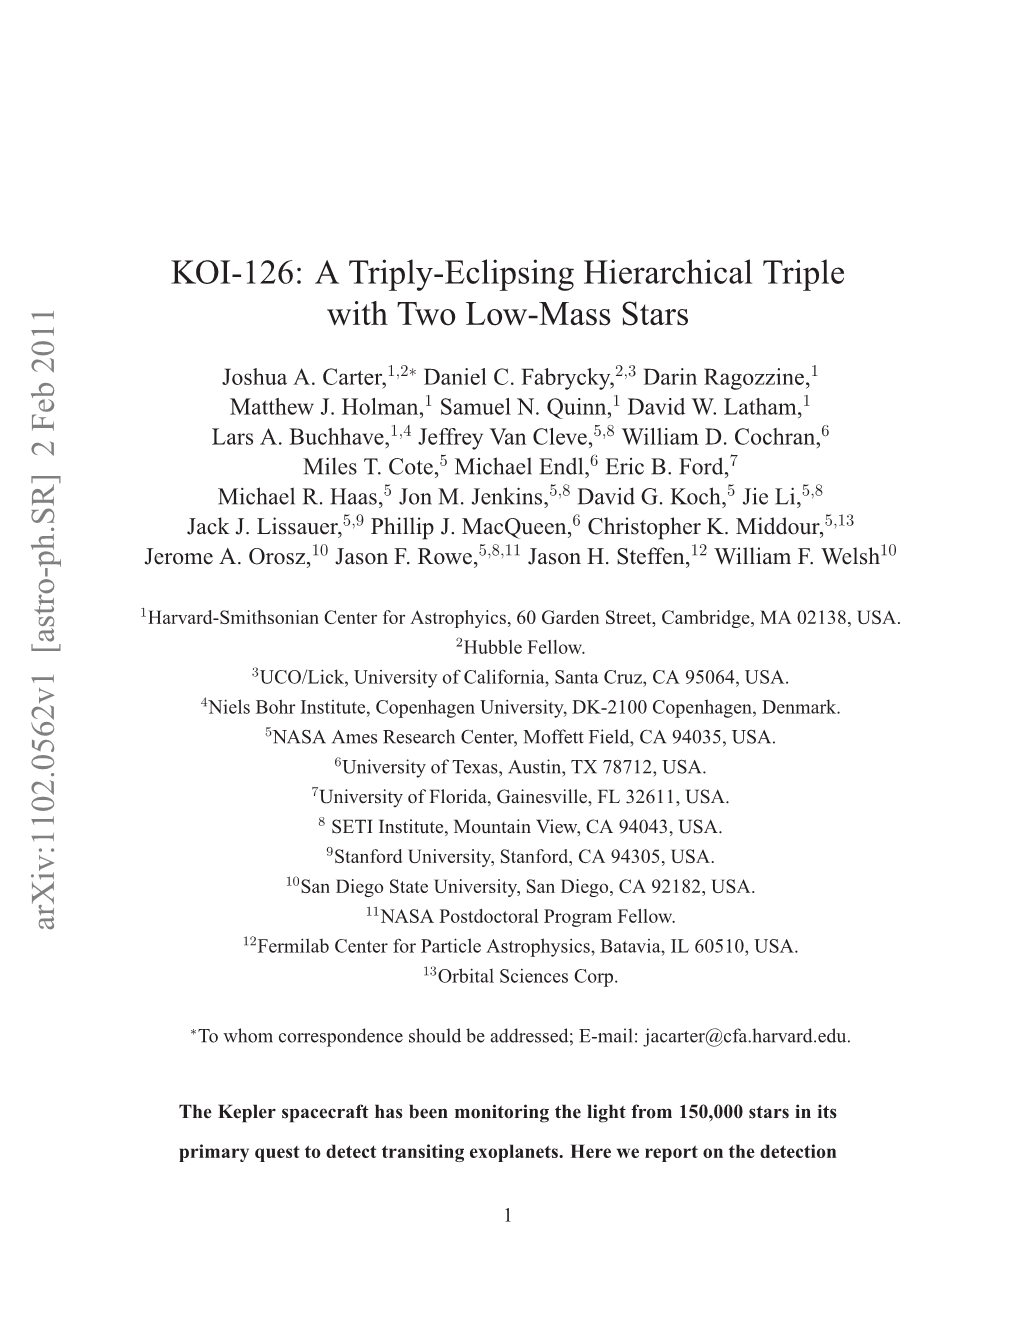 KOI-126: a Triply-Eclipsing Hierarchical Triple with Two Low